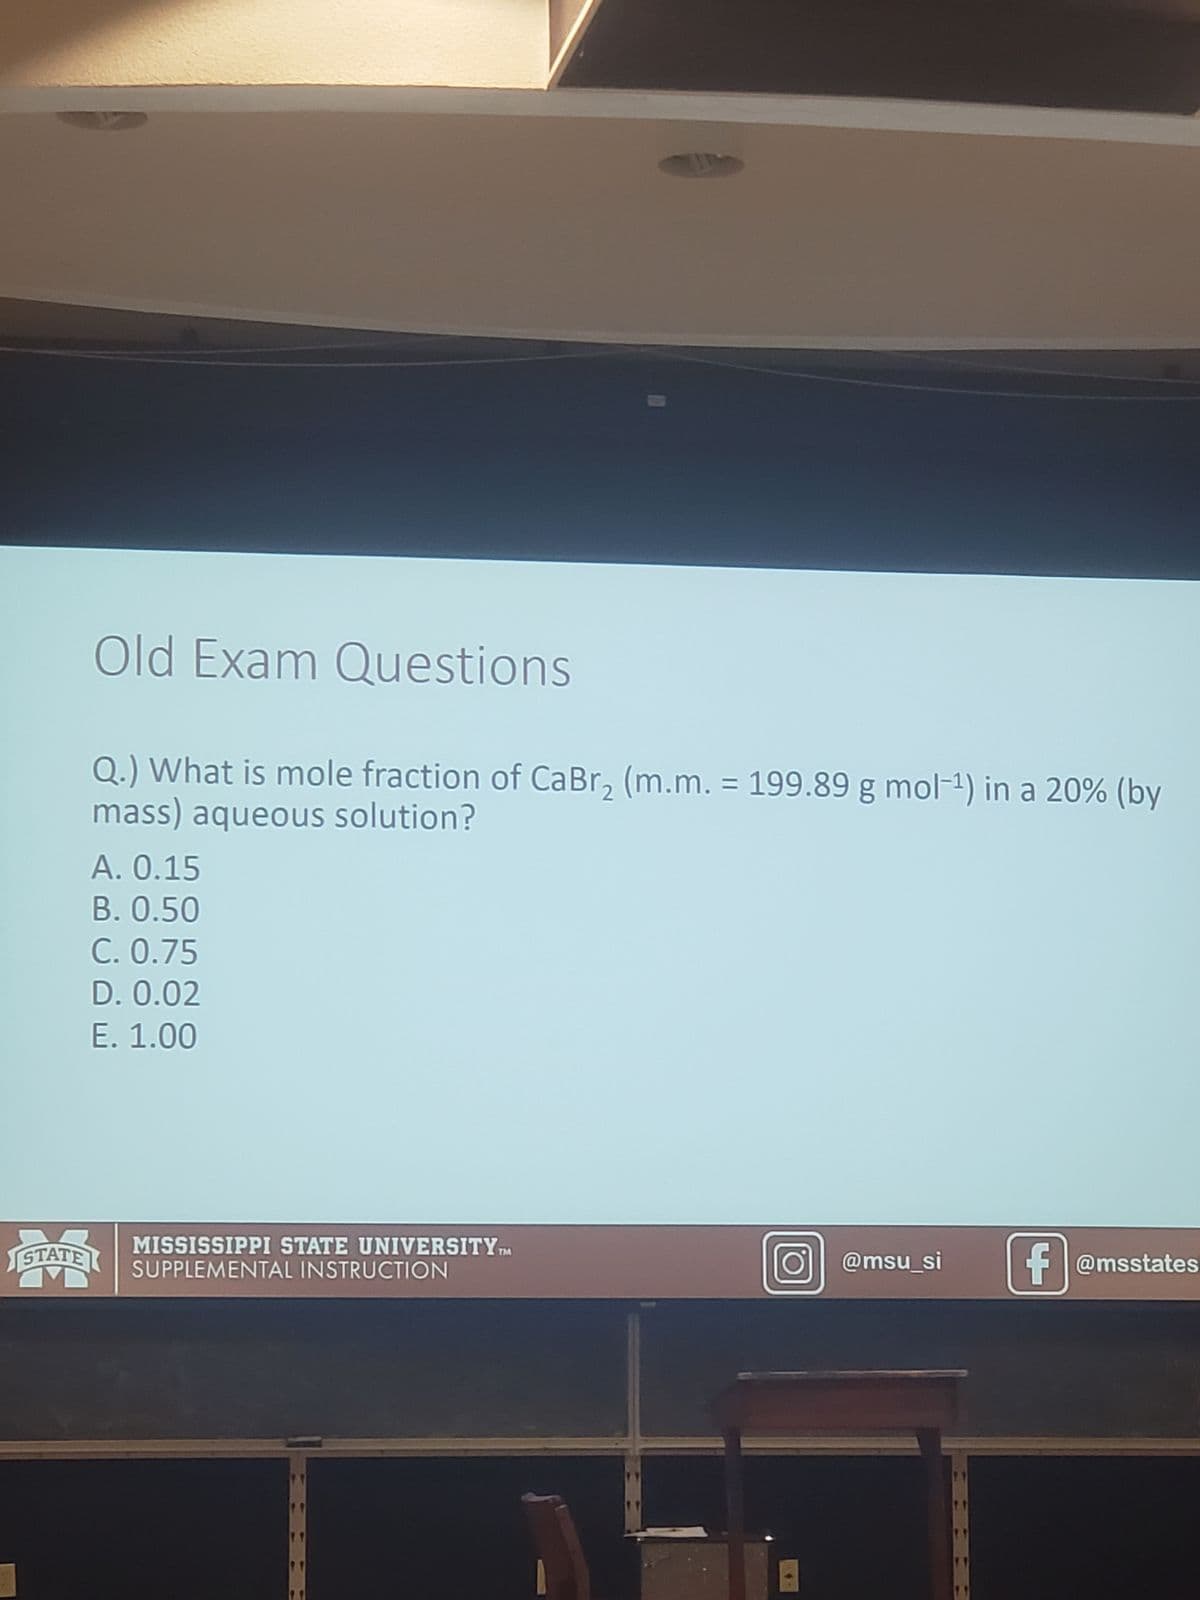 STATE
Old Exam Questions
Q.) What is mole fraction of CaBr₂ (m.m. = 199.89 g mol-¹) in a 20% (by
mass) aqueous solution?
A. 0.15
B. 0.50
C. 0.75
D. 0.02
E. 1.00
MISSISSIPPI STATE UNIVERSITY TM
SUPPLEMENTAL INSTRUCTION
@msu_si
1.1
1.1
f@msstates